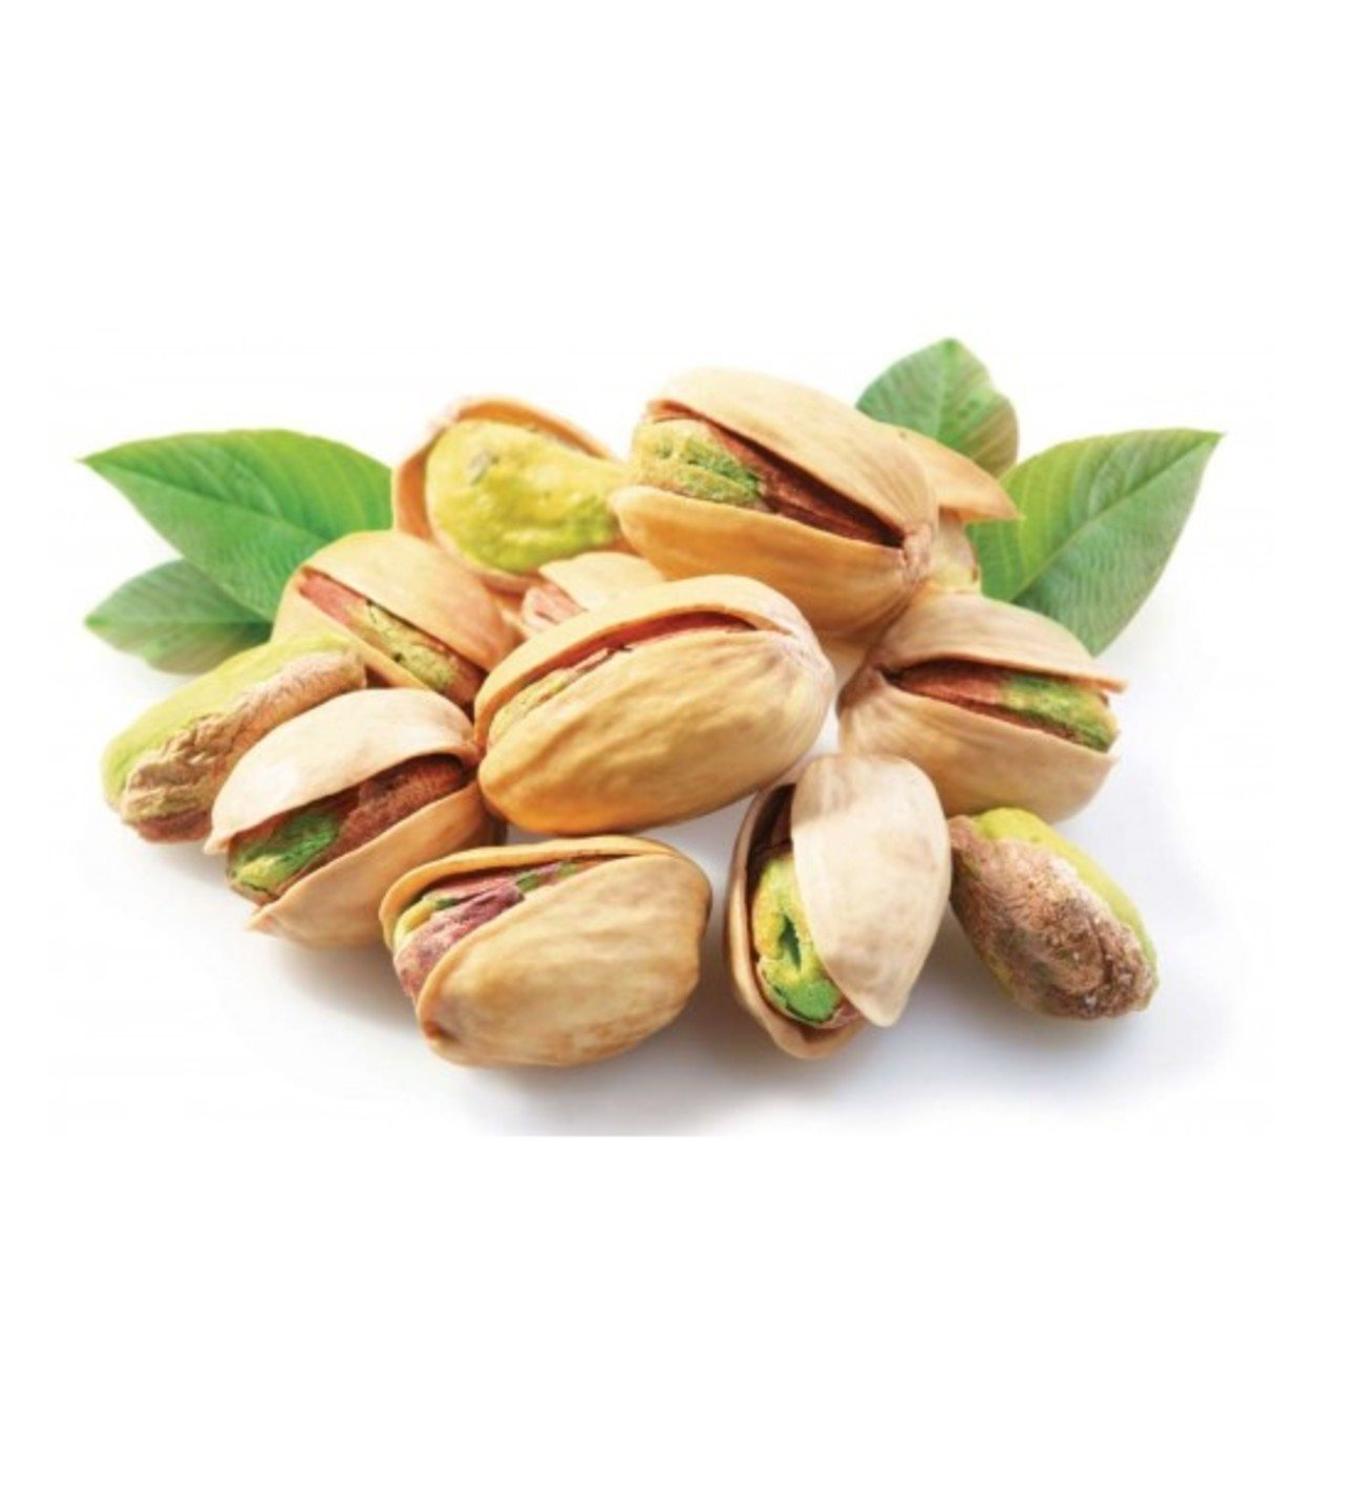 Turkish Pistachio Natural Hazel Nut 1000 gr High Quality Fast Shipping